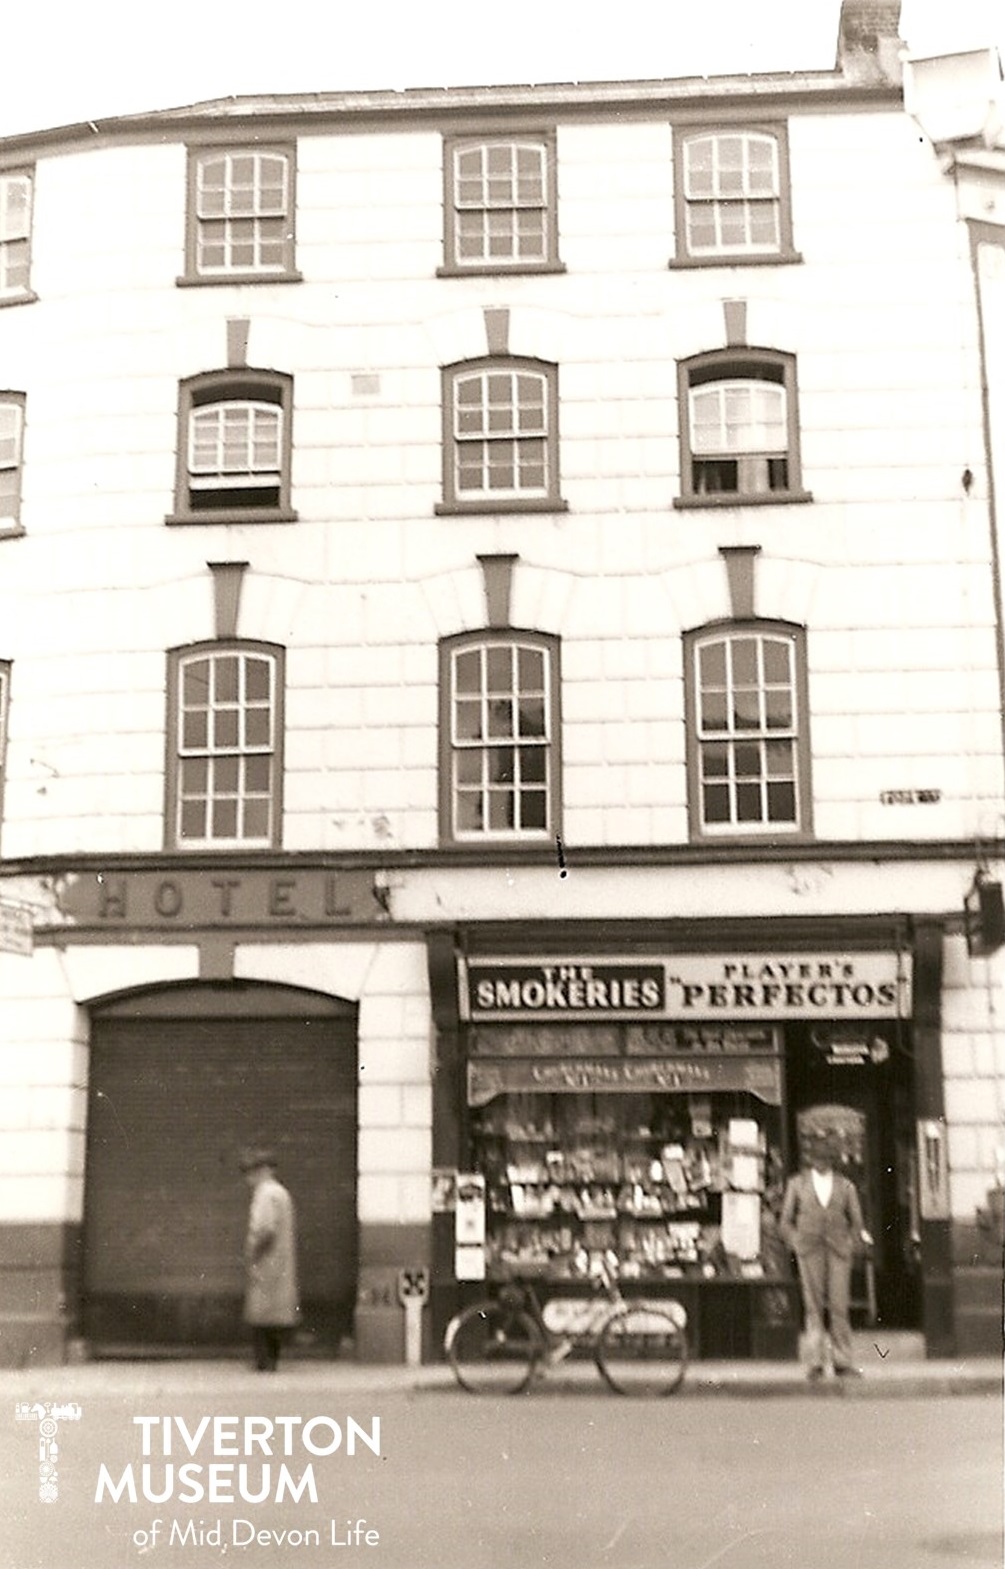 Black and white image of a four storey building with large windows. On the bottom left there is a sign saying 'HOTEL' with a large arch underneath. There is a man in a long overcoat walking past the arch. On the bottom right is the front of a shop with a man standing outside looking at the camera. The shop sign reads 'The Smokeries' and the window display is very full but it's too far away to see what the products are. There is a bicycle propped up against the kerb in front of the shop and the man is wearing a light coloured suit.